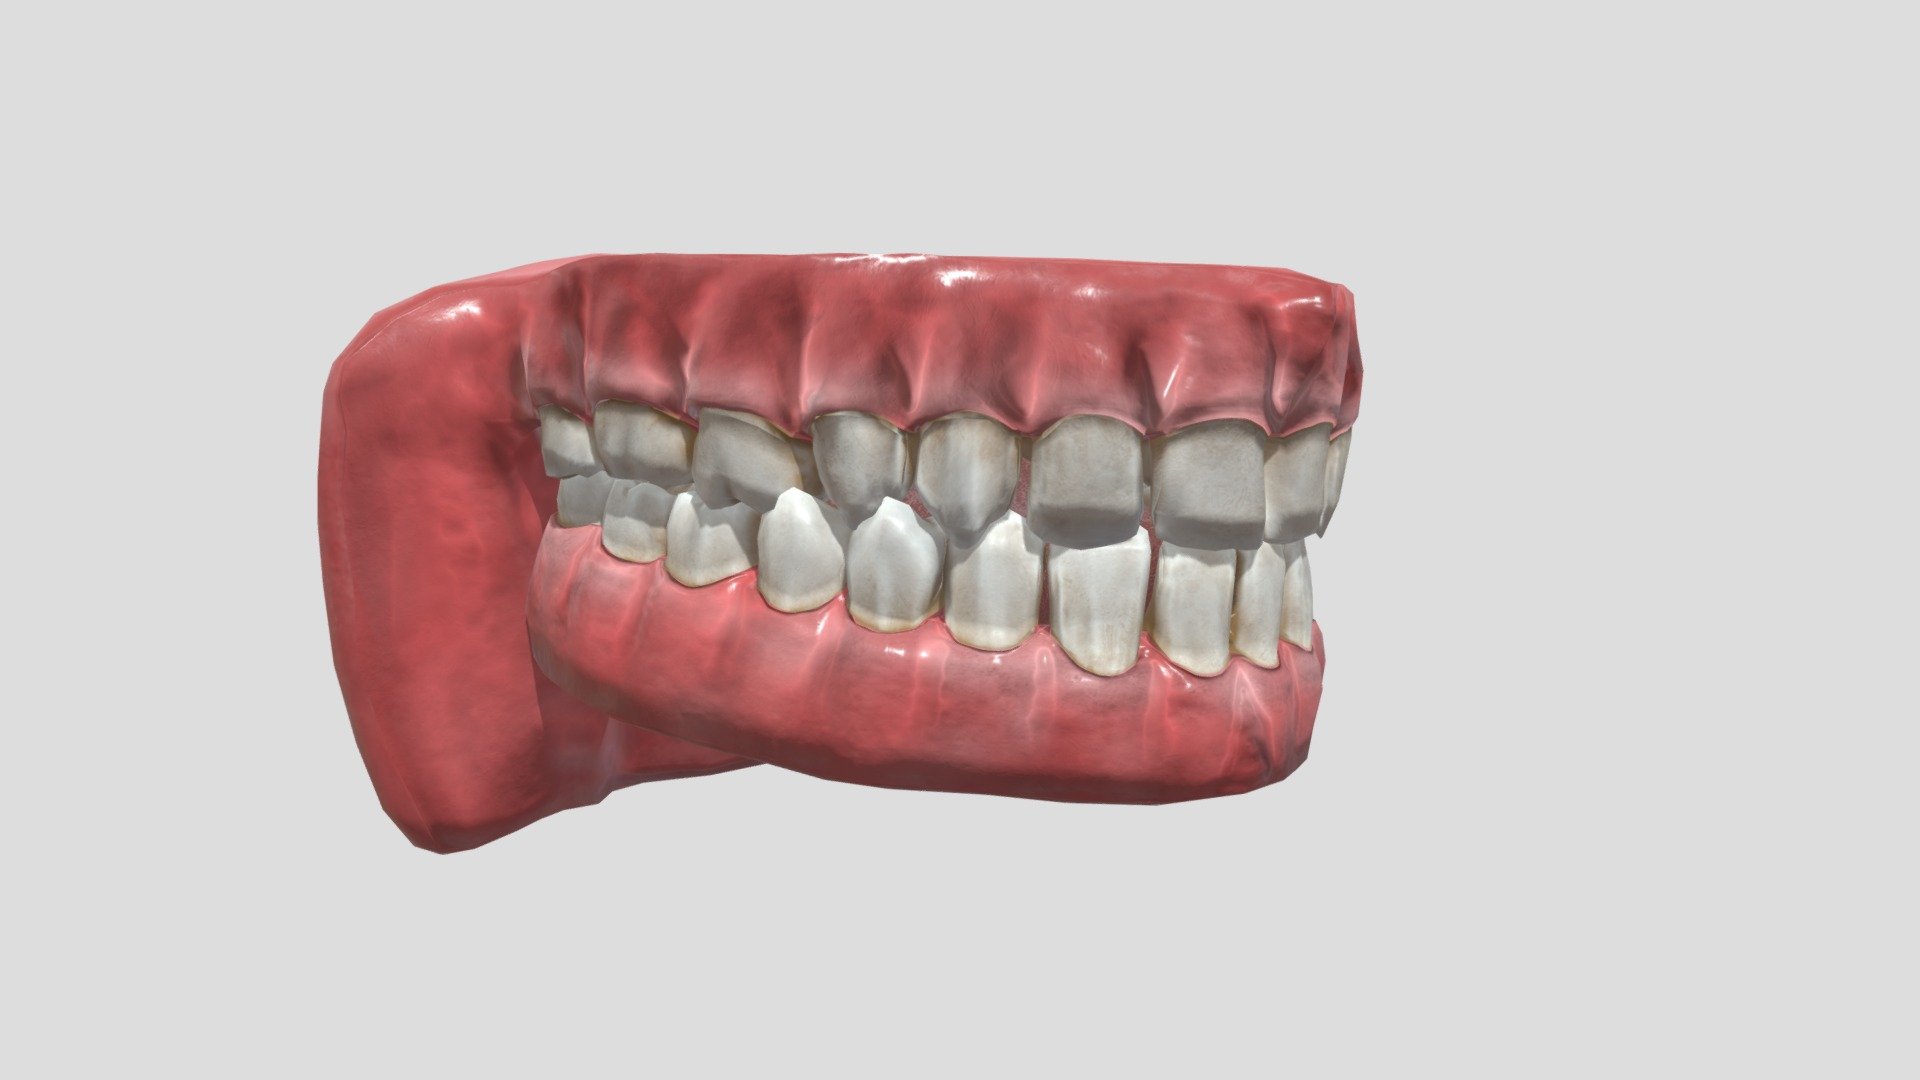 Realistic human mouth specially designed for playable characters, low poly model. Includes 8 animations and a basic rig.
Use PBR pipeline: Metalness/Rougness 3d model